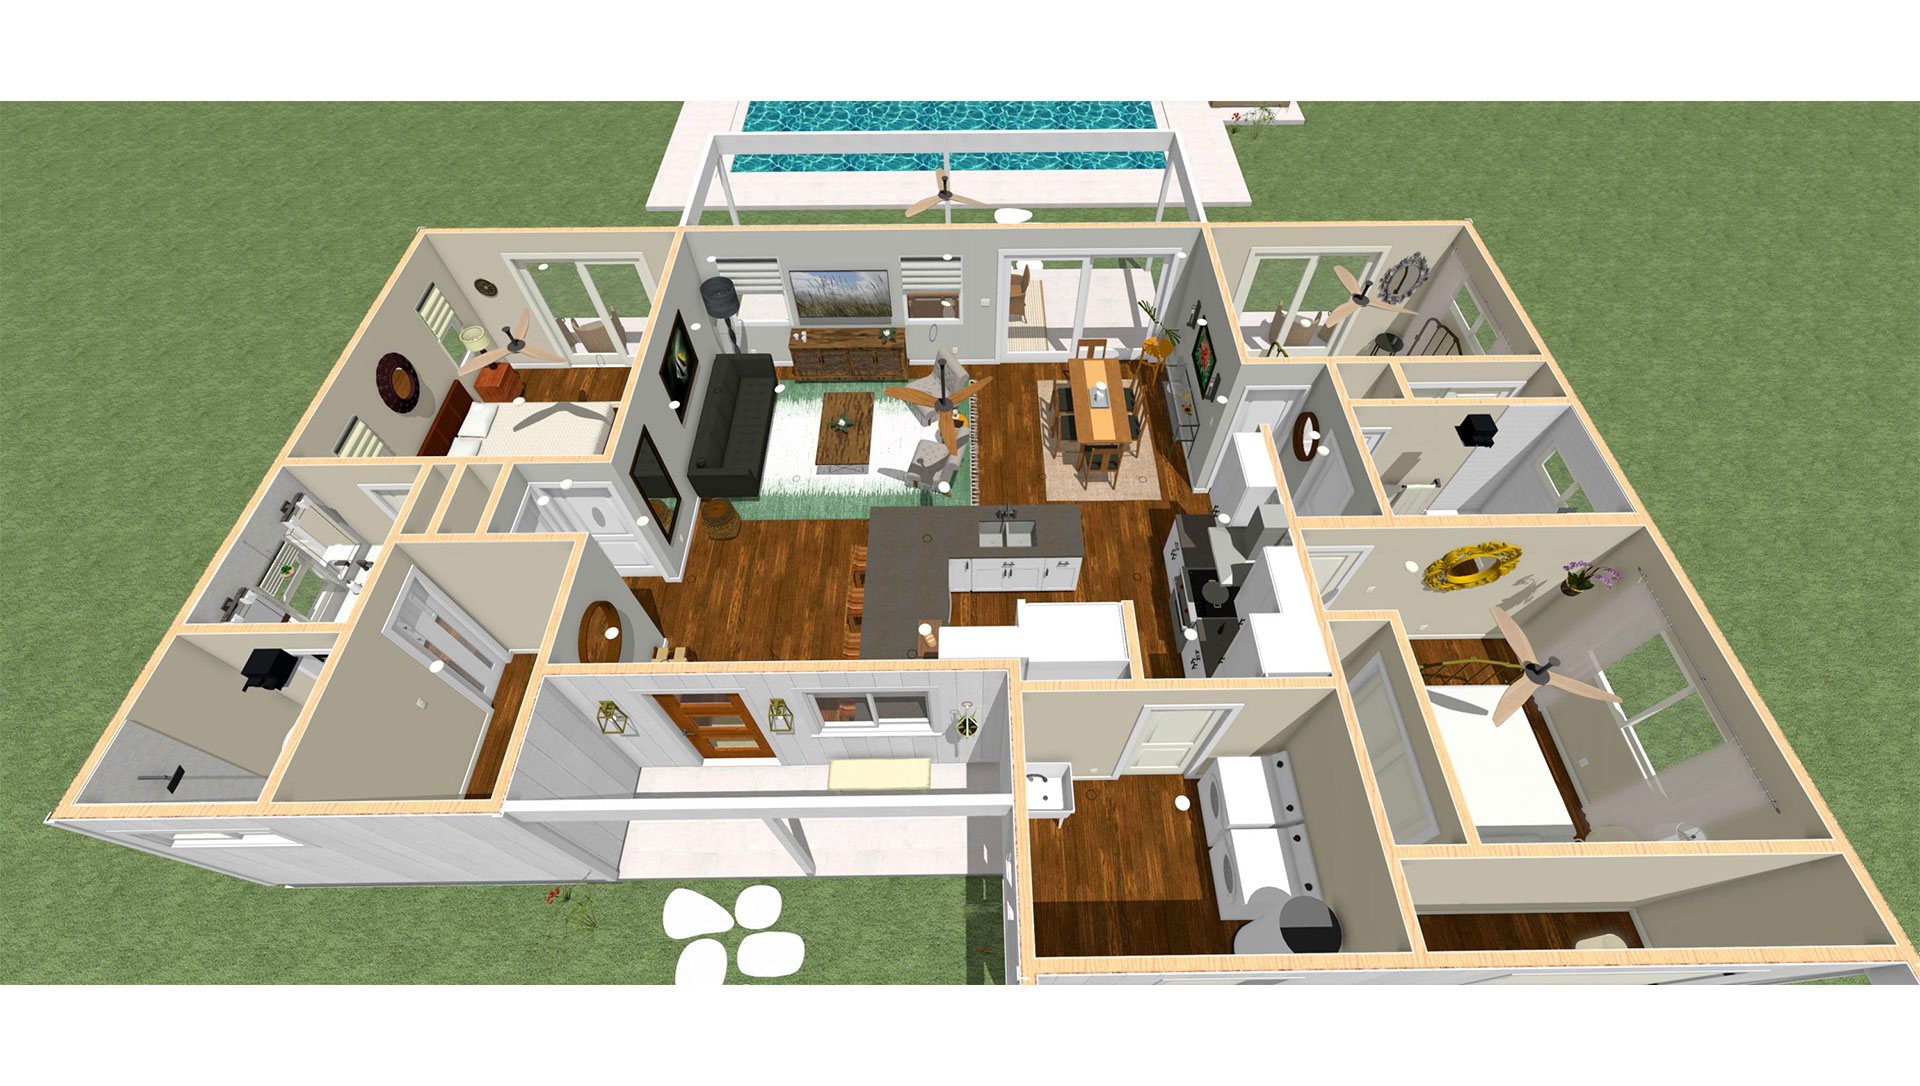 Zoomed out view of Floor plan